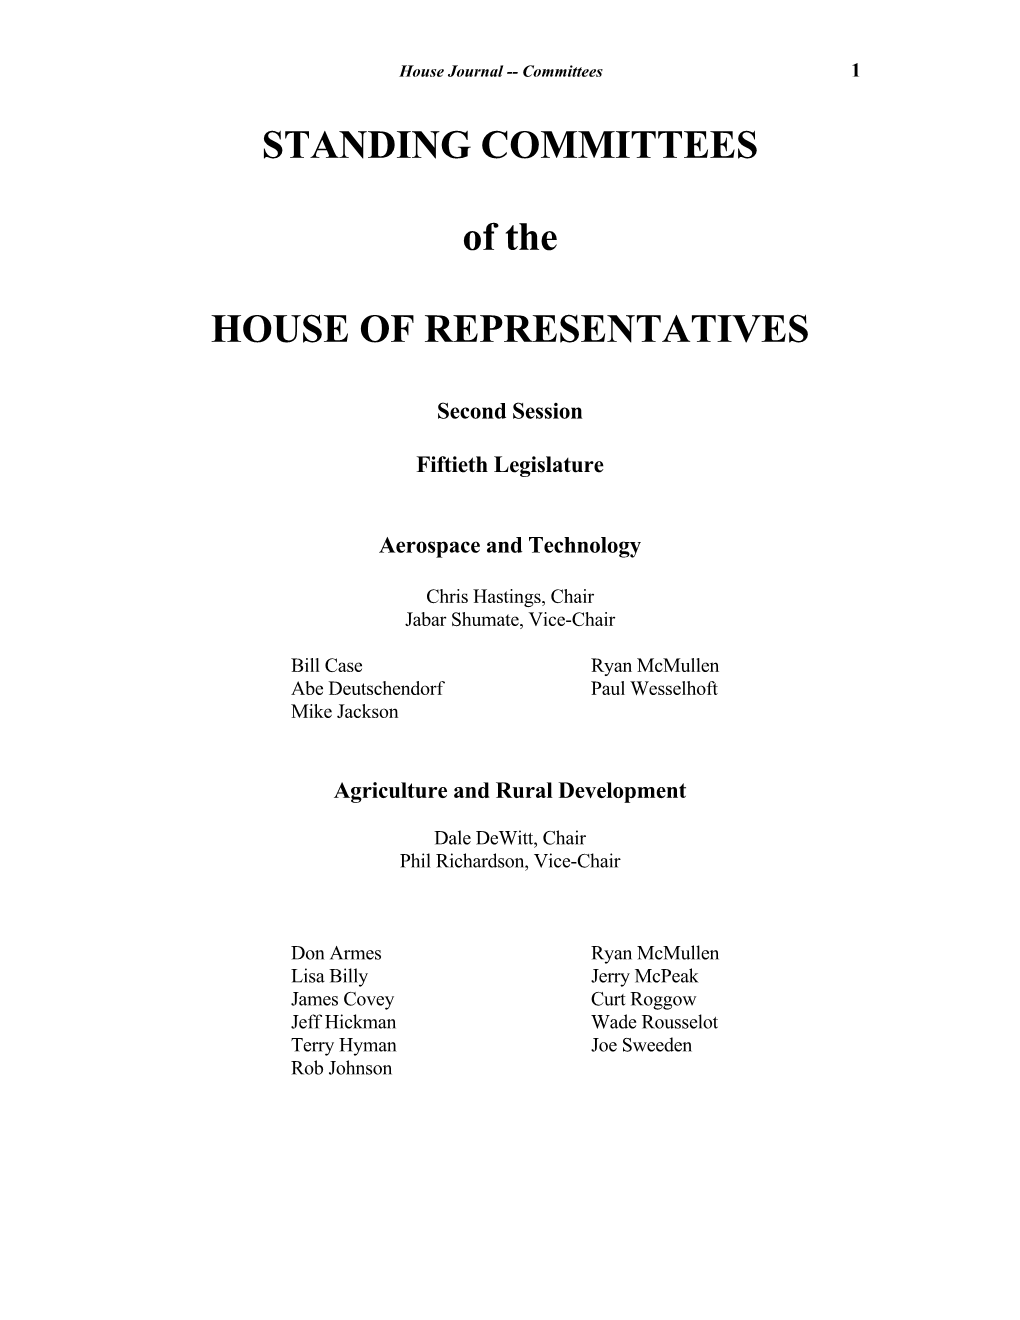 STANDING COMMITTEES of the HOUSE of REPRESENTATIVES